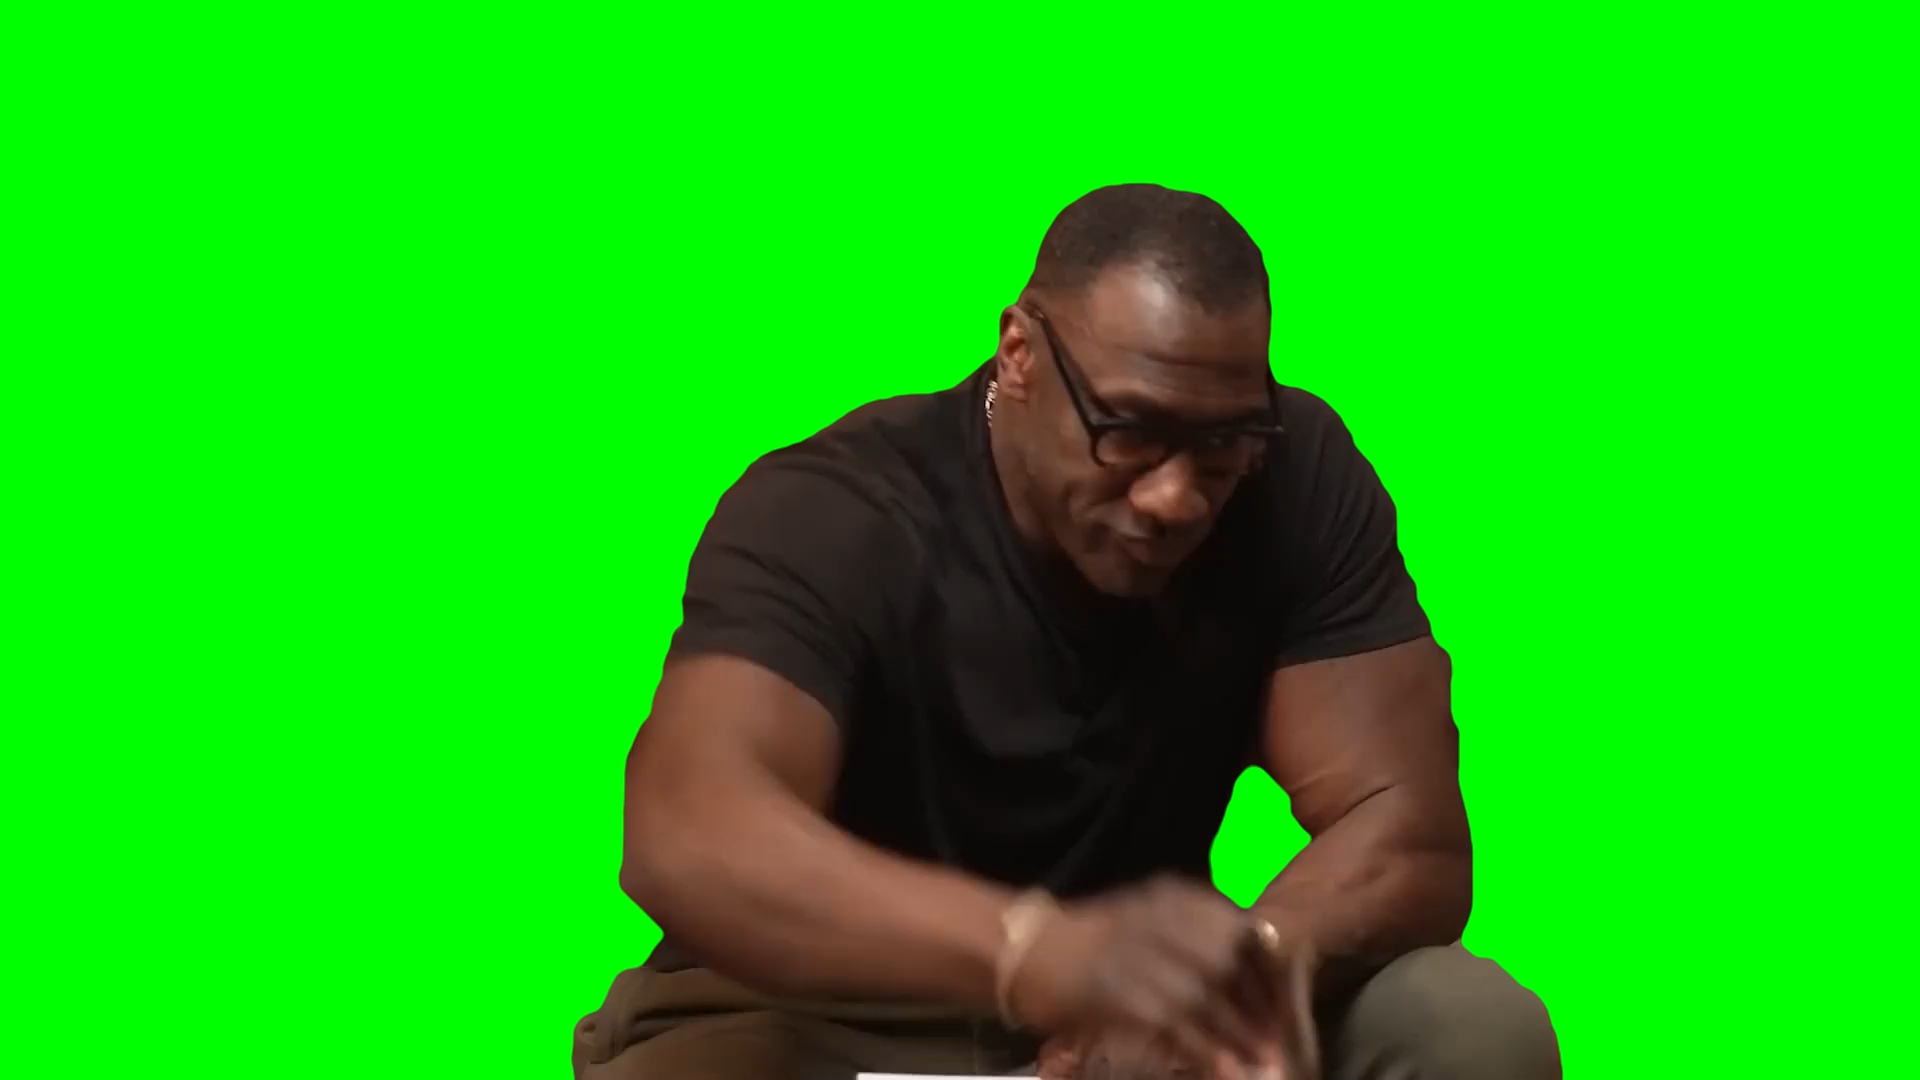 Shannon Sharpe - OH LORD! Anybody else need a shot of this? (Green Screen)